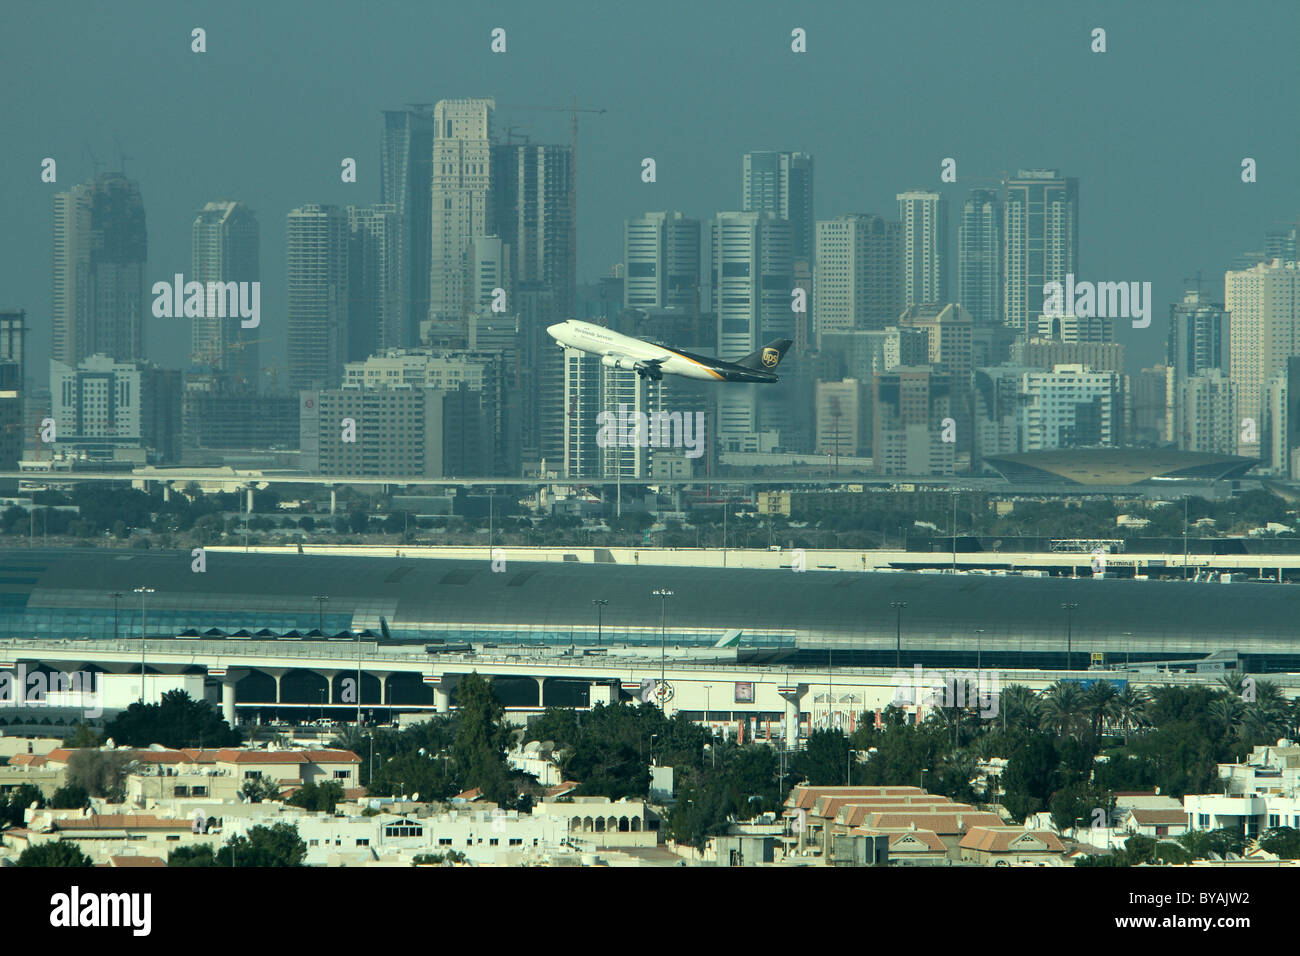 A plane takes off from Dubai's new International Airport terminal Stock Photo